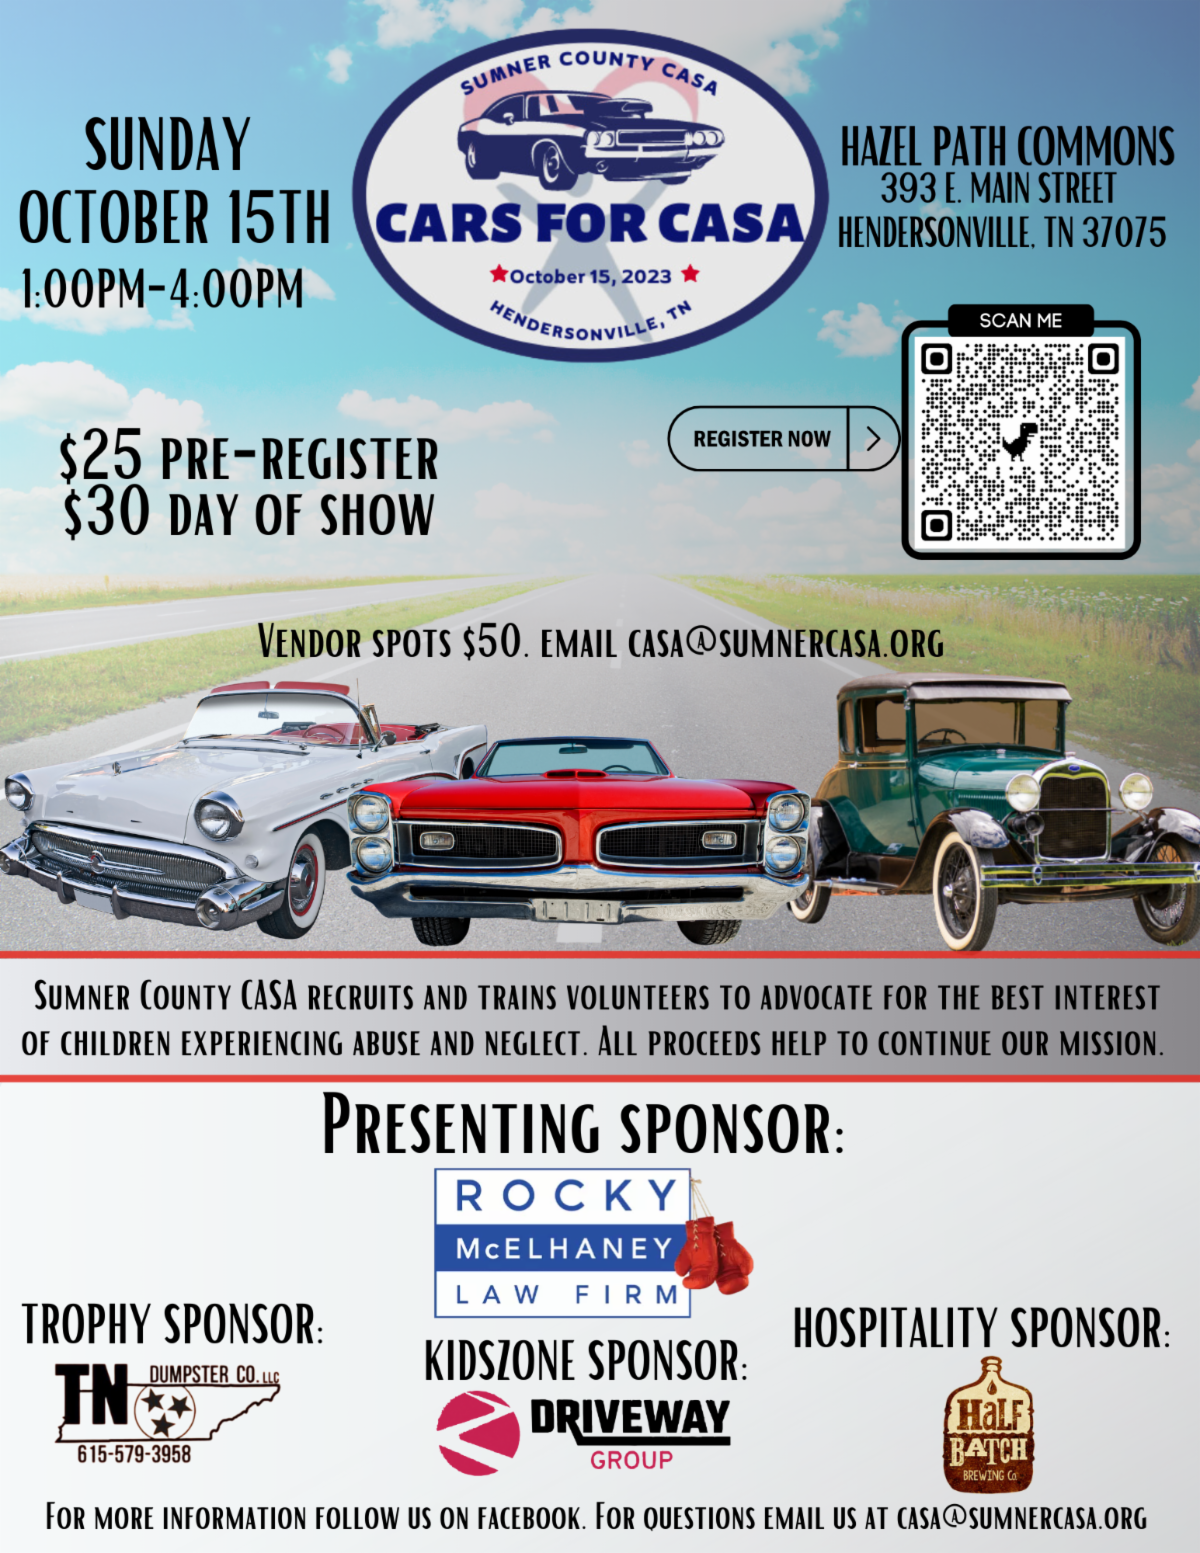 casa for cars event flyer with details and sponsor logos